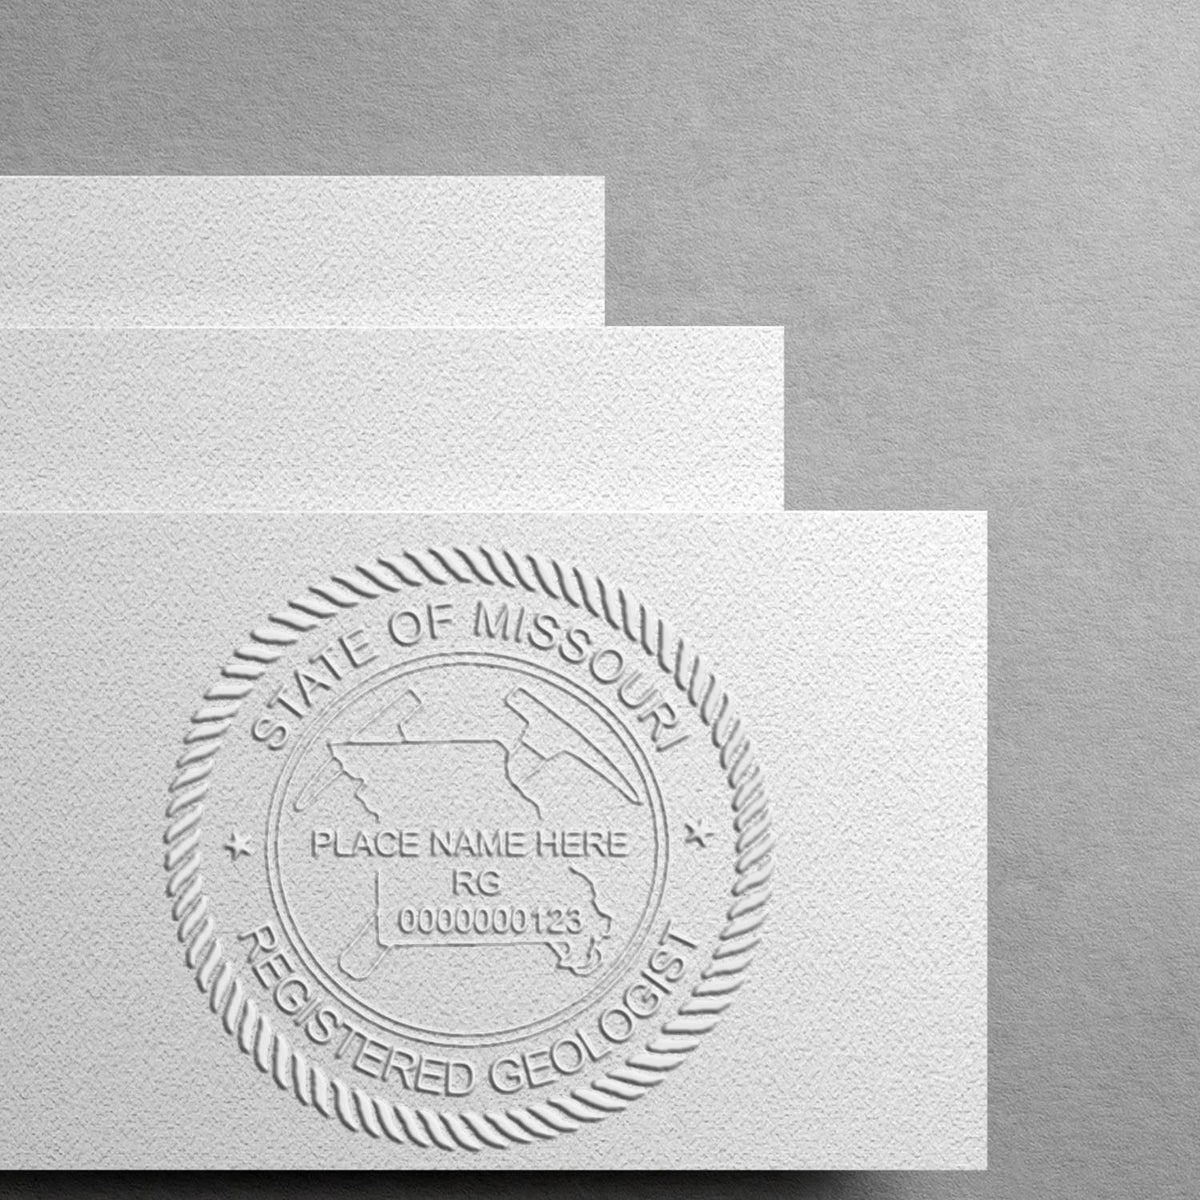 This paper is stamped with a sample imprint of the Long Reach Missouri Geology Seal, signifying its quality and reliability.